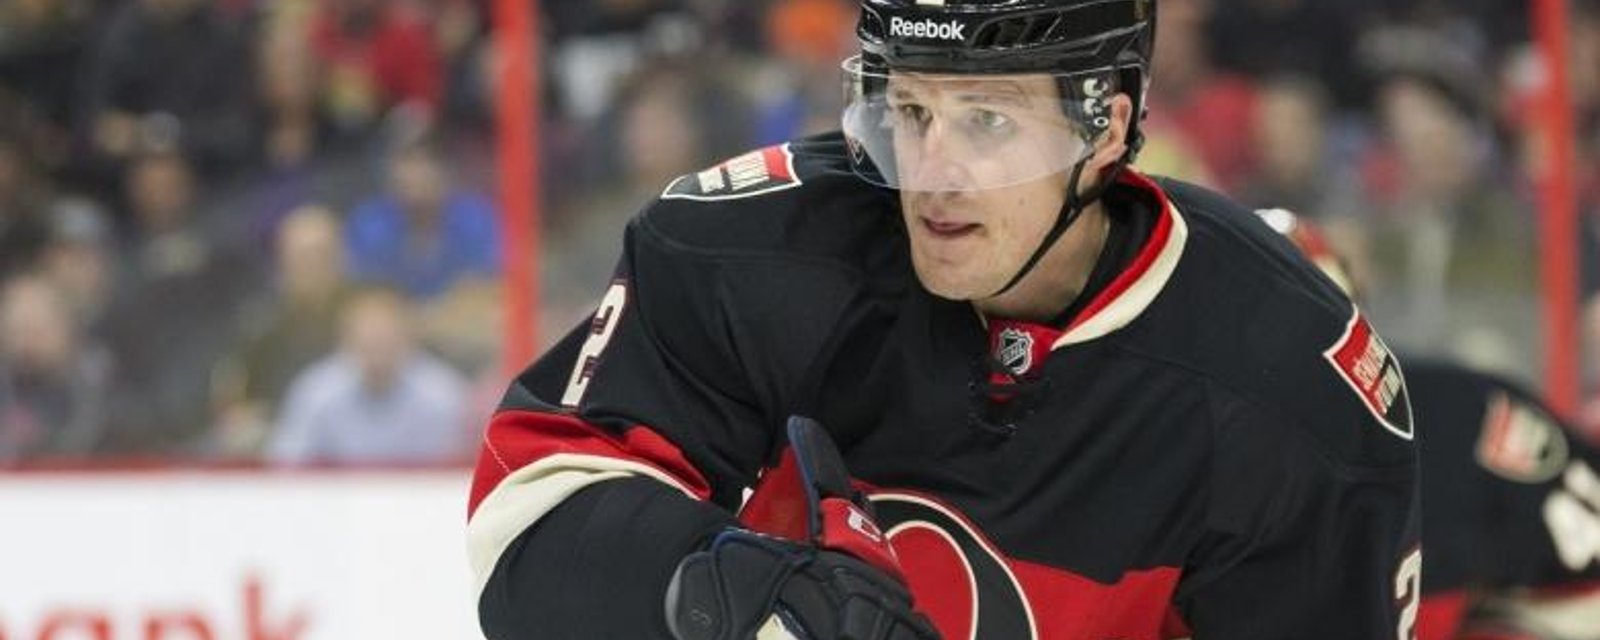 Dion Phaneuf gets booed while practicing at Air Canada Center.